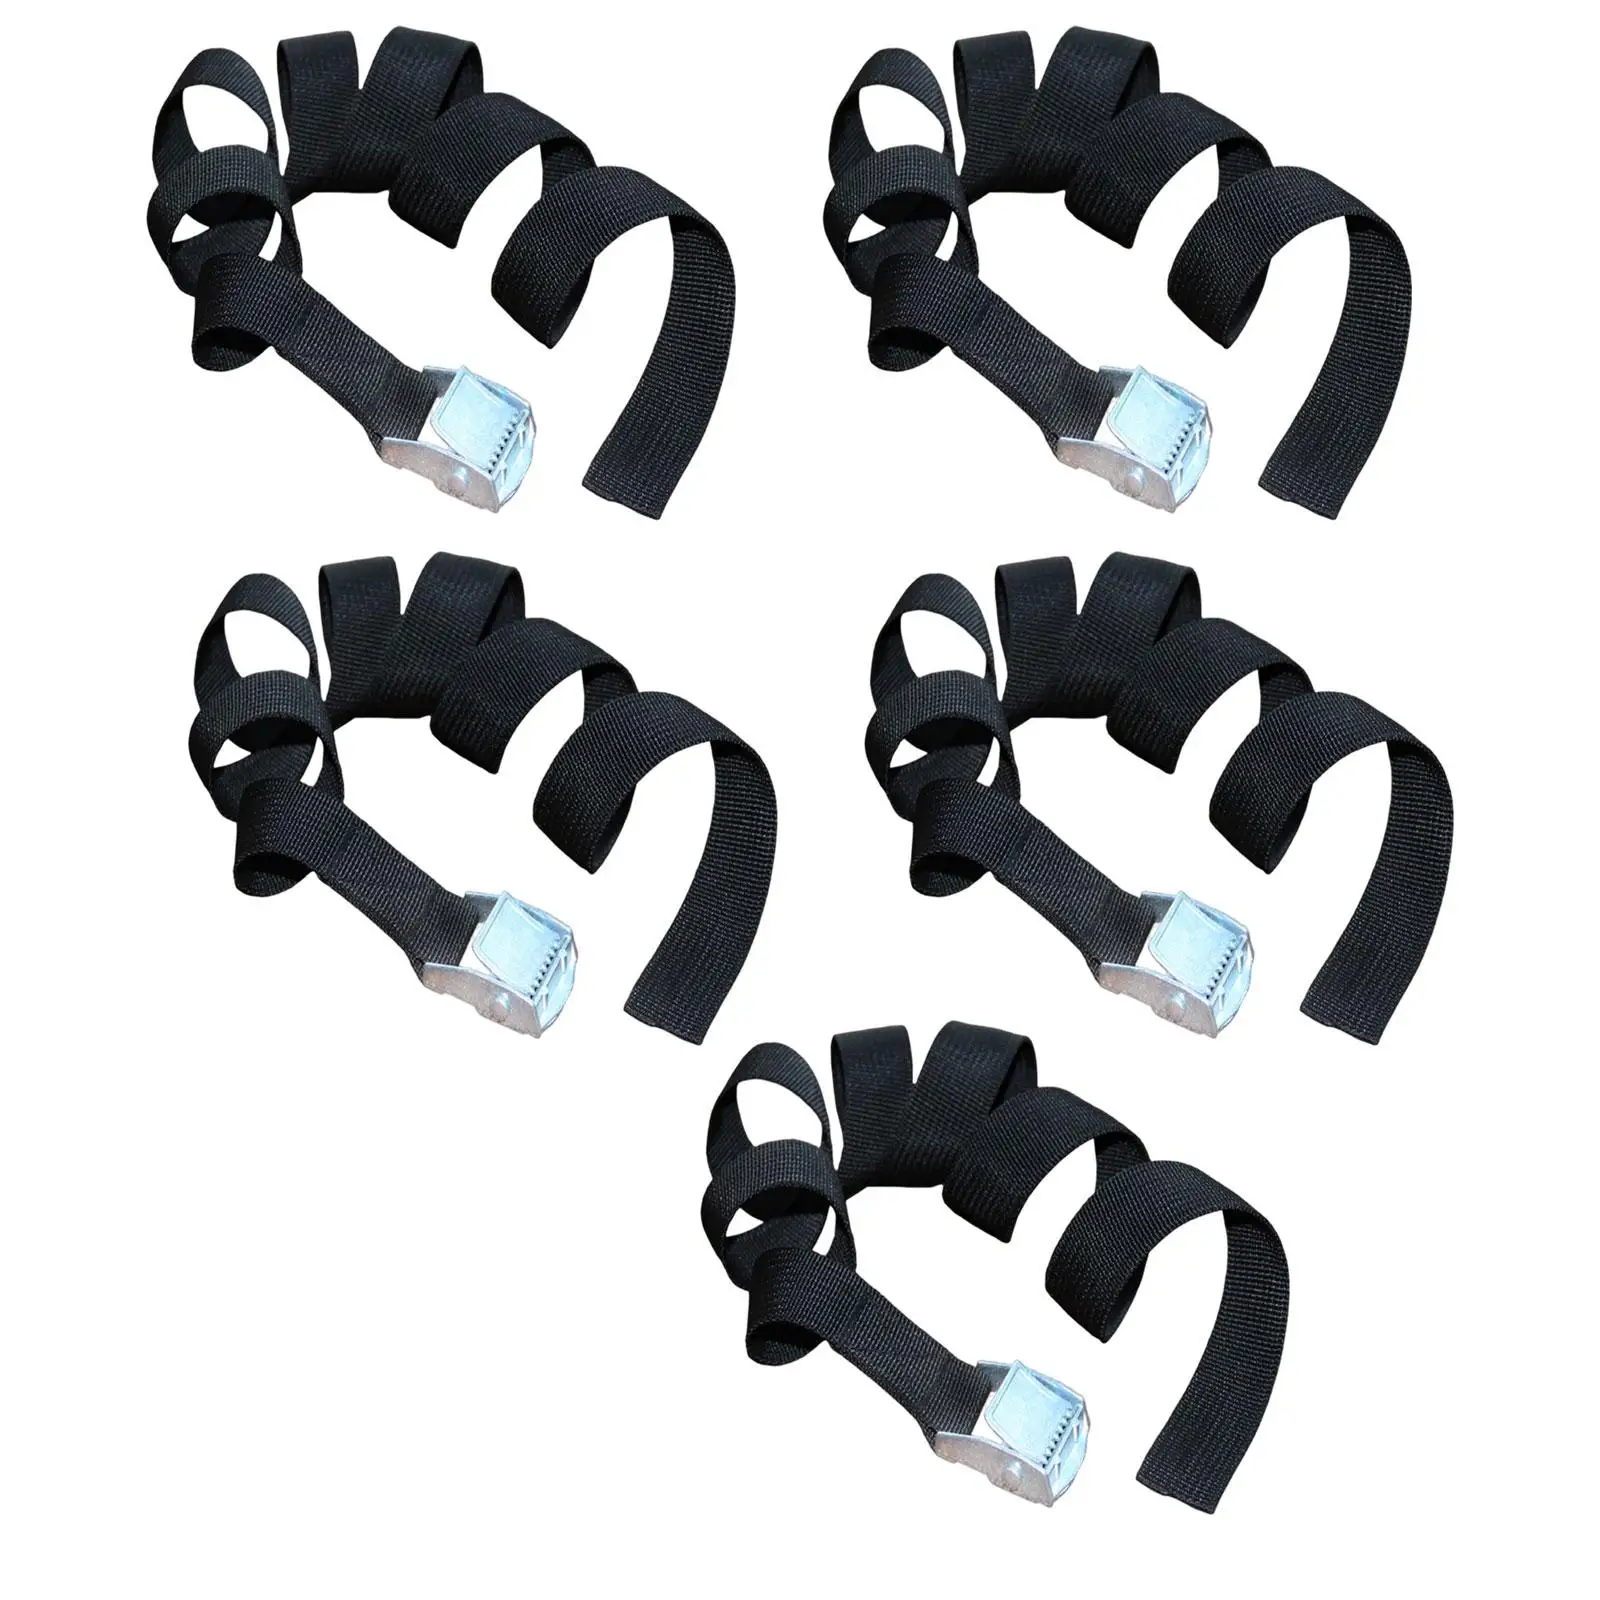 5 Pieces Luggage Fixing Straps with Metal cam Buckle for Trailer Fixing